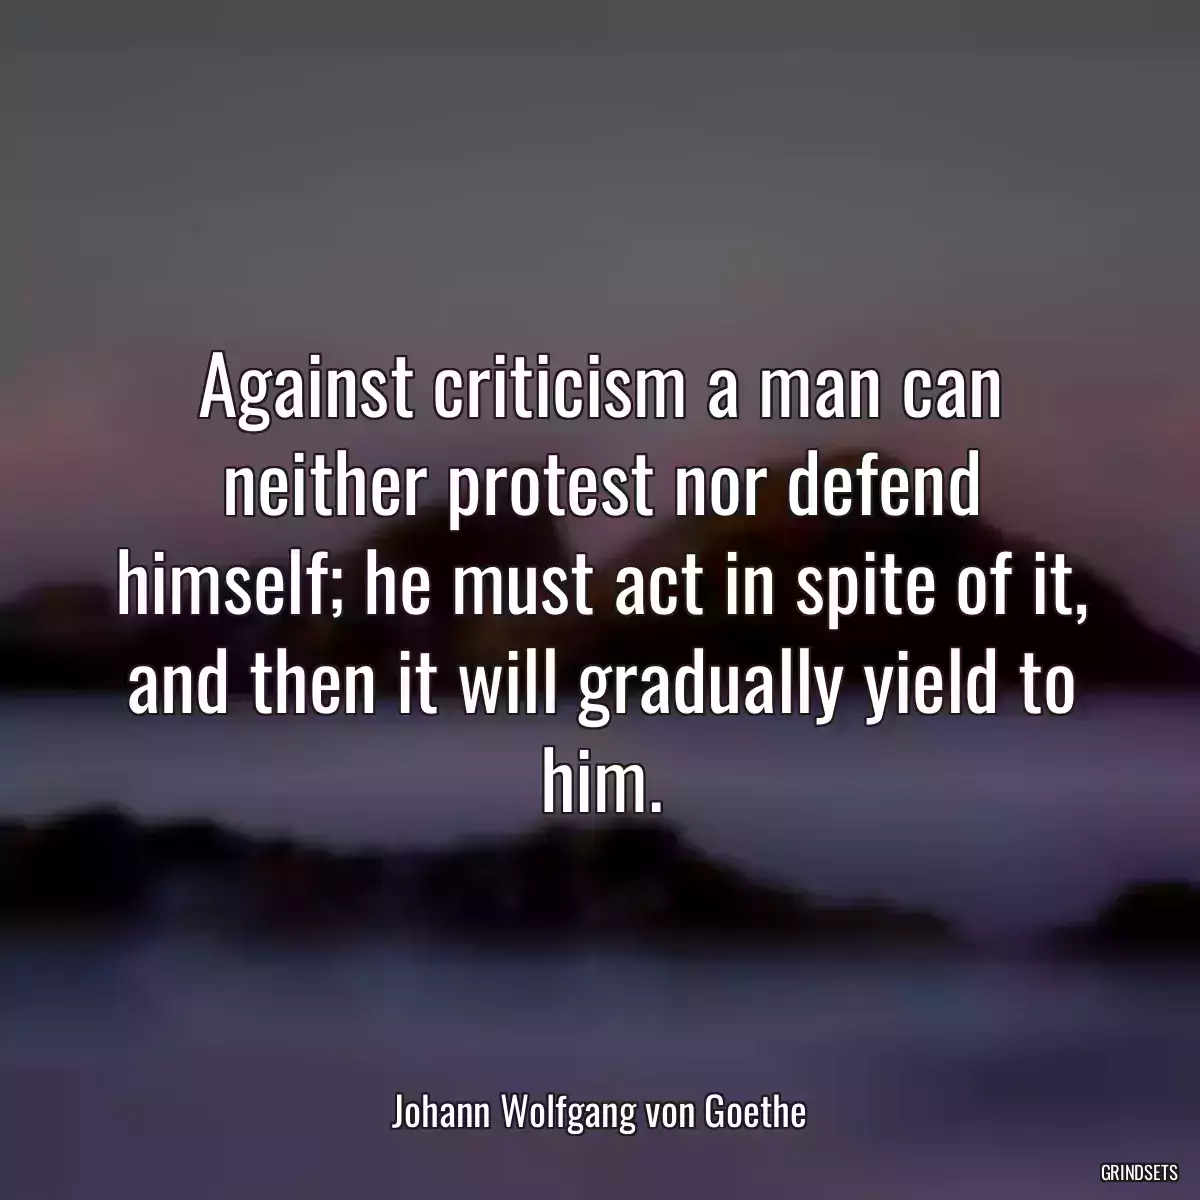 Against criticism a man can neither protest nor defend himself; he must act in spite of it, and then it will gradually yield to him.